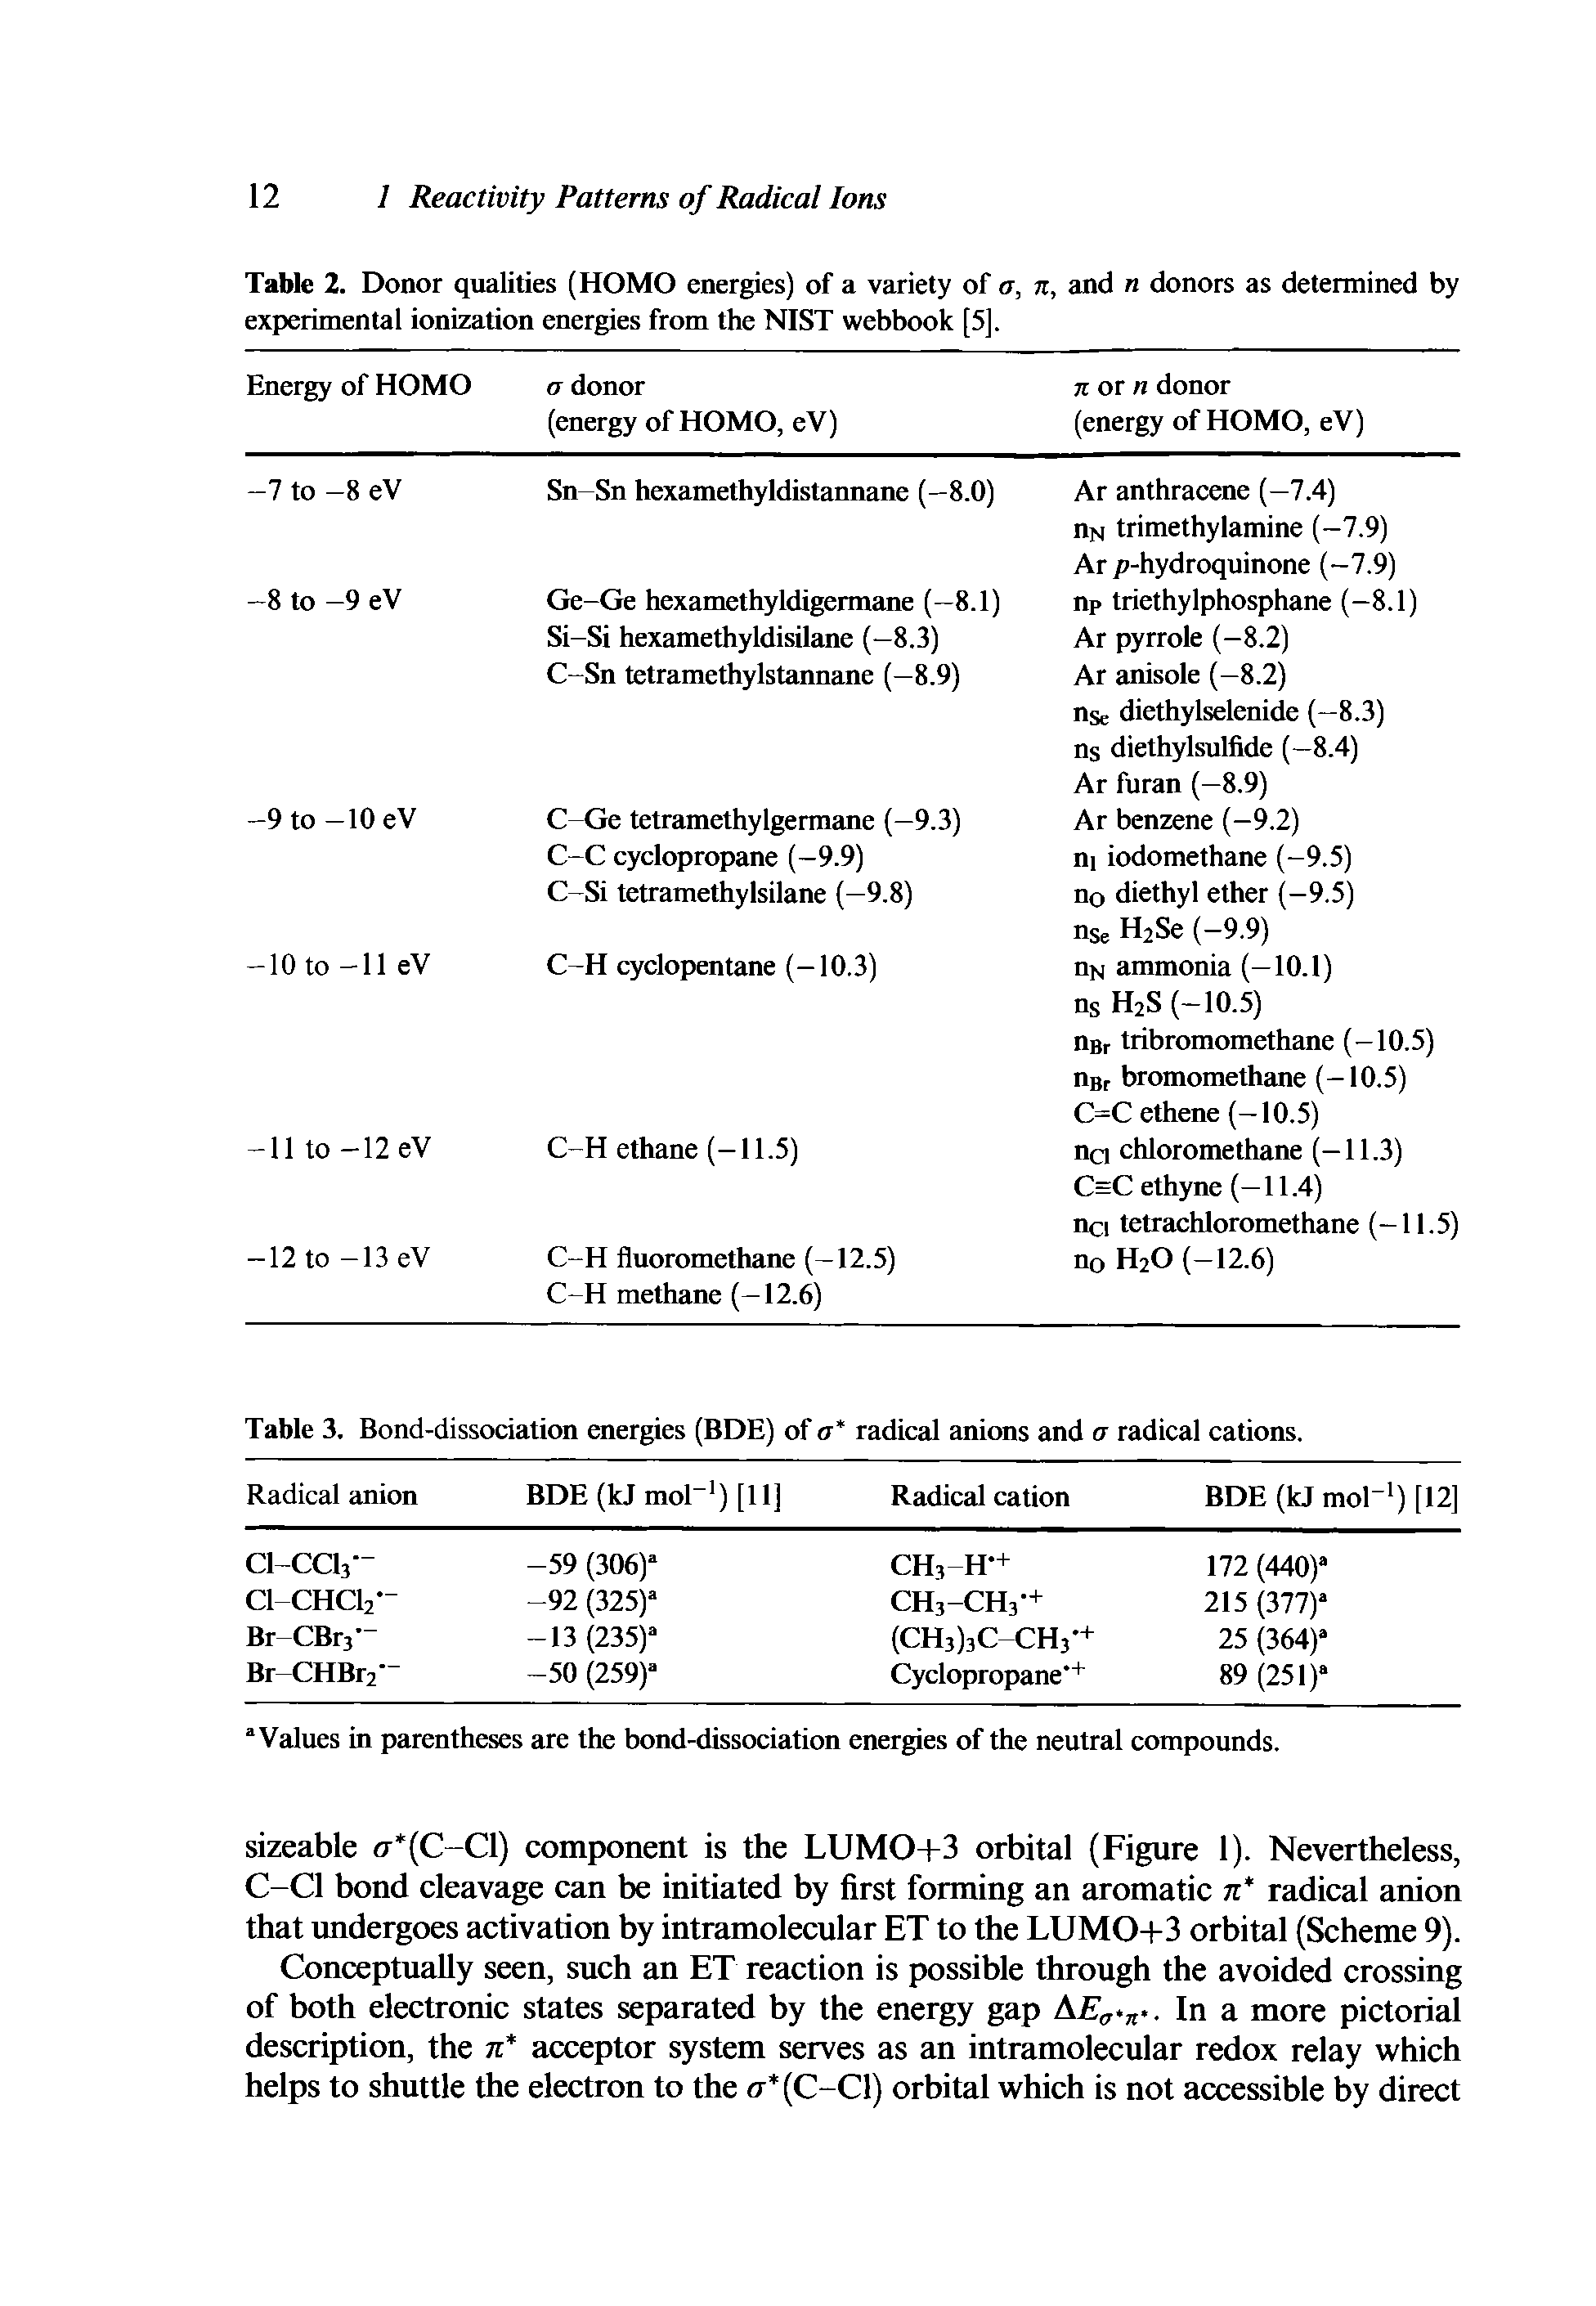 Table 2. Donor qualities (HOMO energies) of a variety of a, experimental ionization energies from the NIST webbook [5], n, and n donors as determined by...